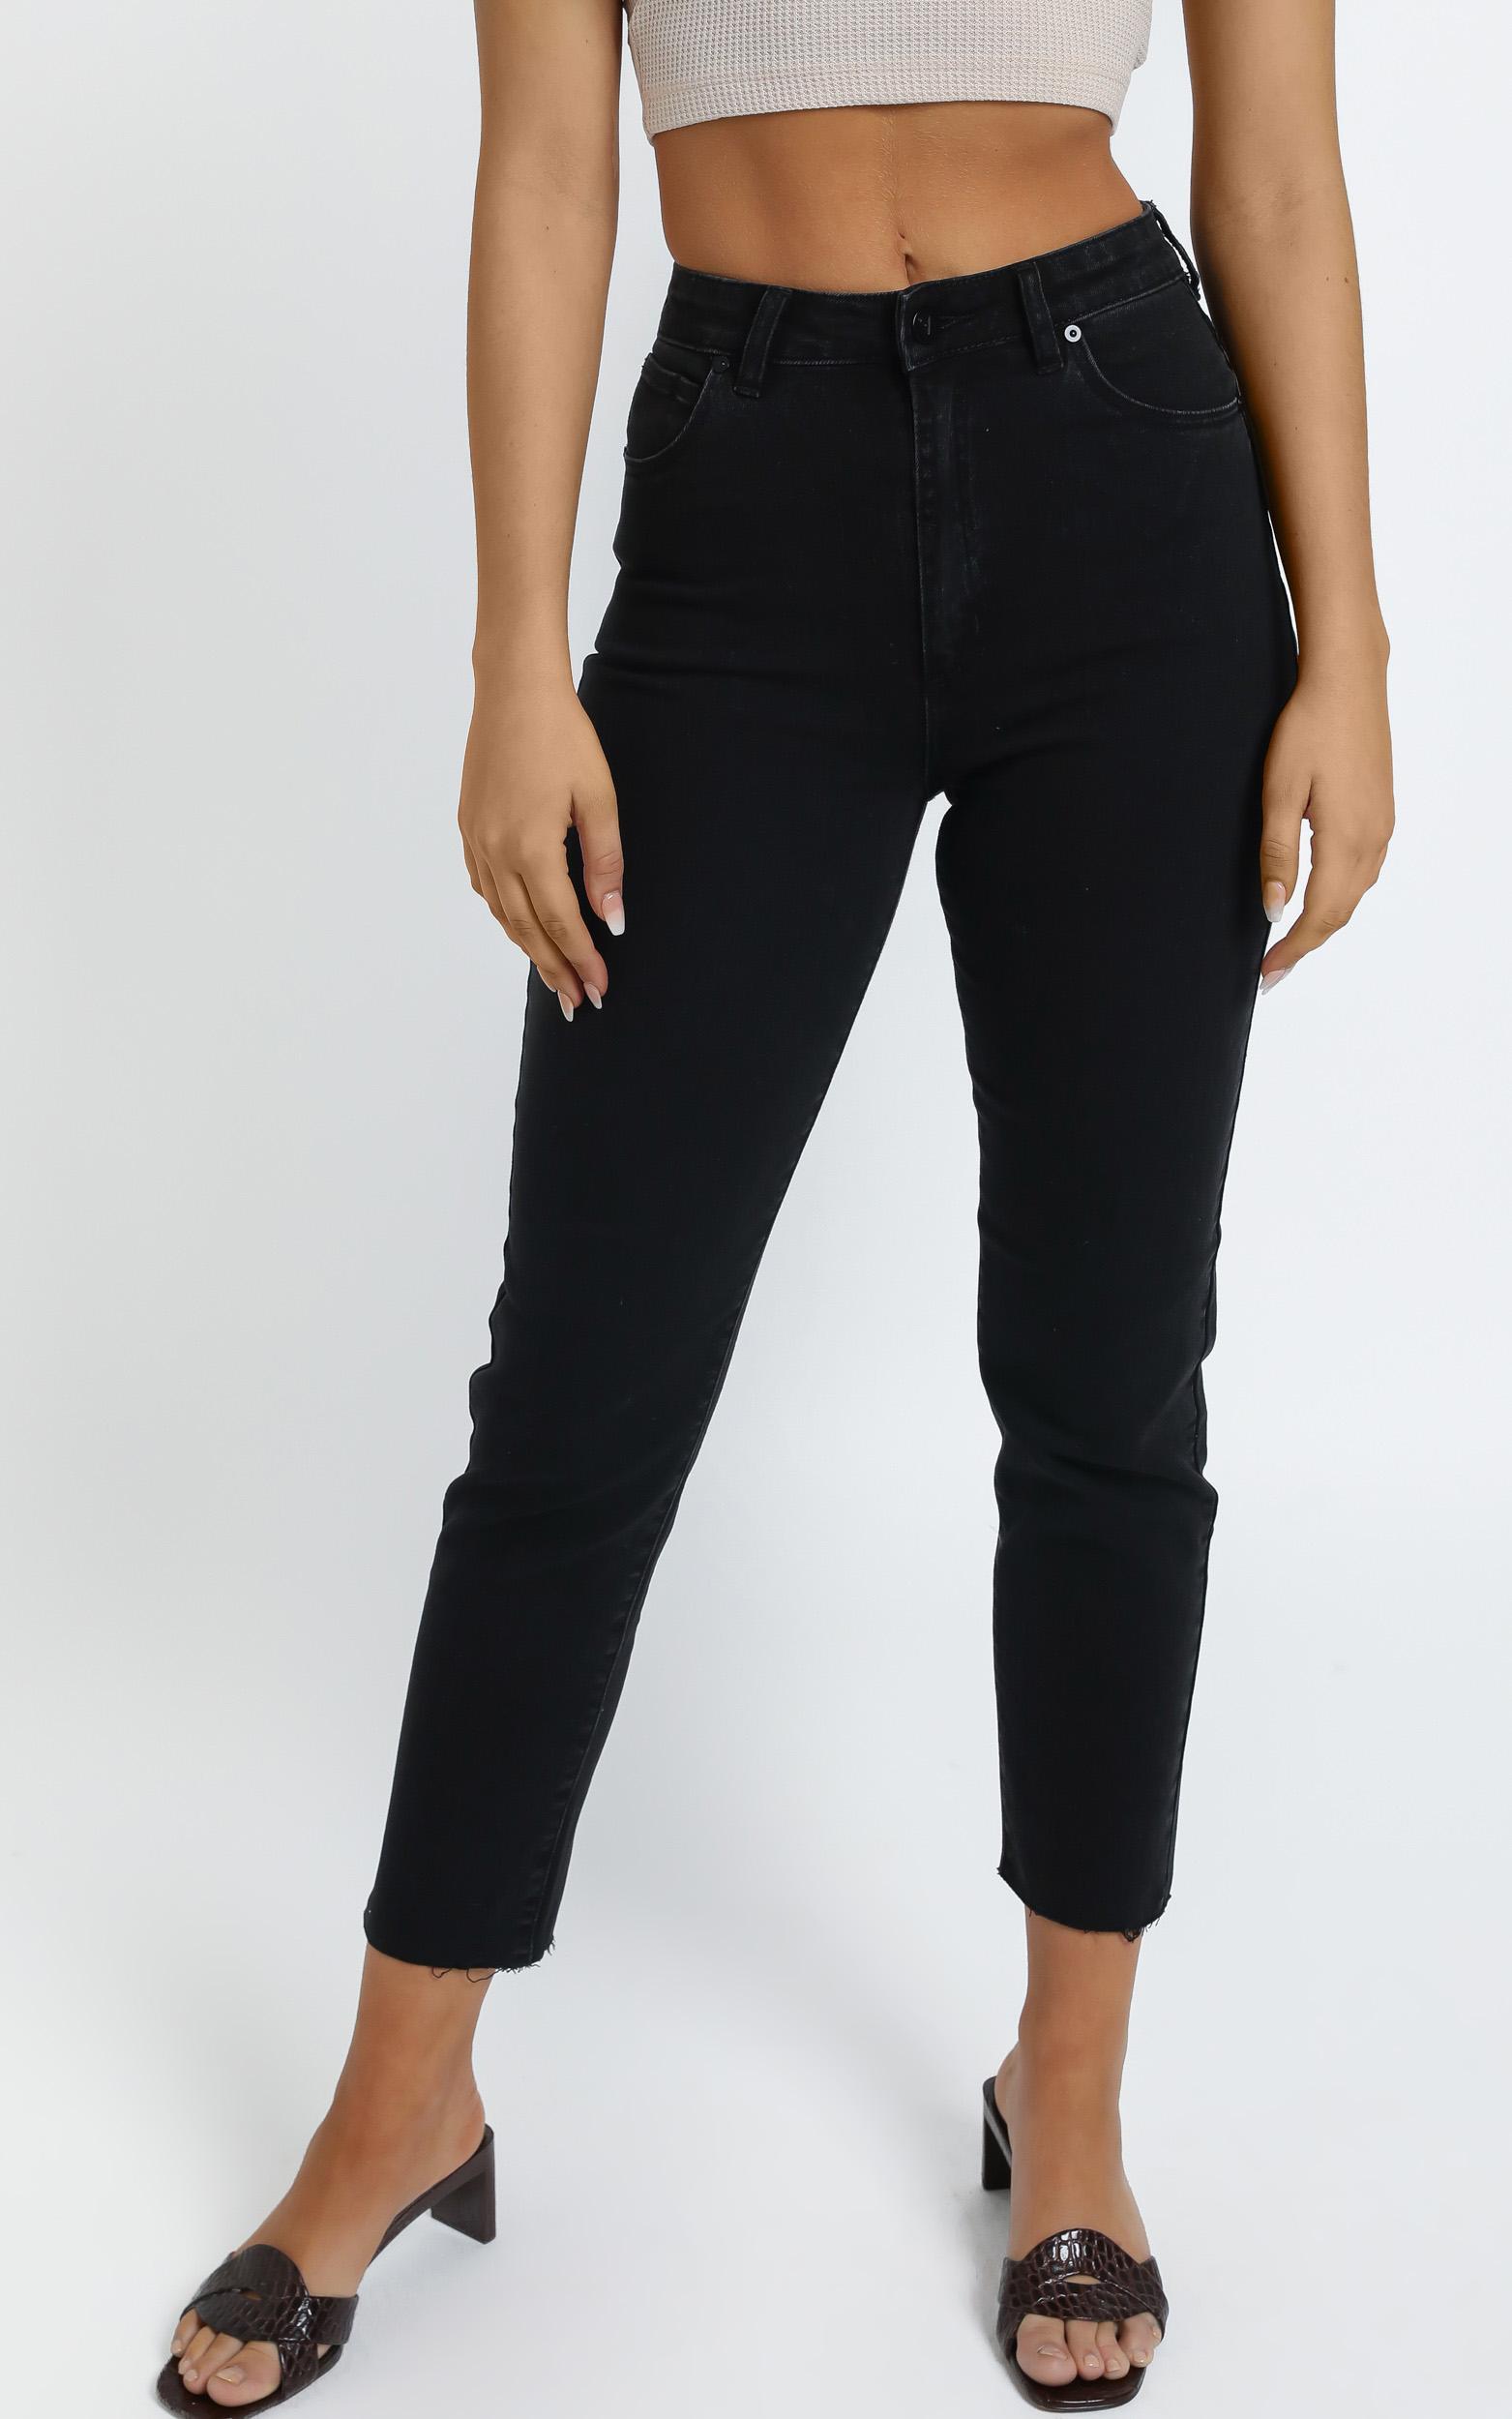 Abrand - A 94 High Slim Jean in 90210 Raw - 14 (XL), BLK2, hi-res image number null